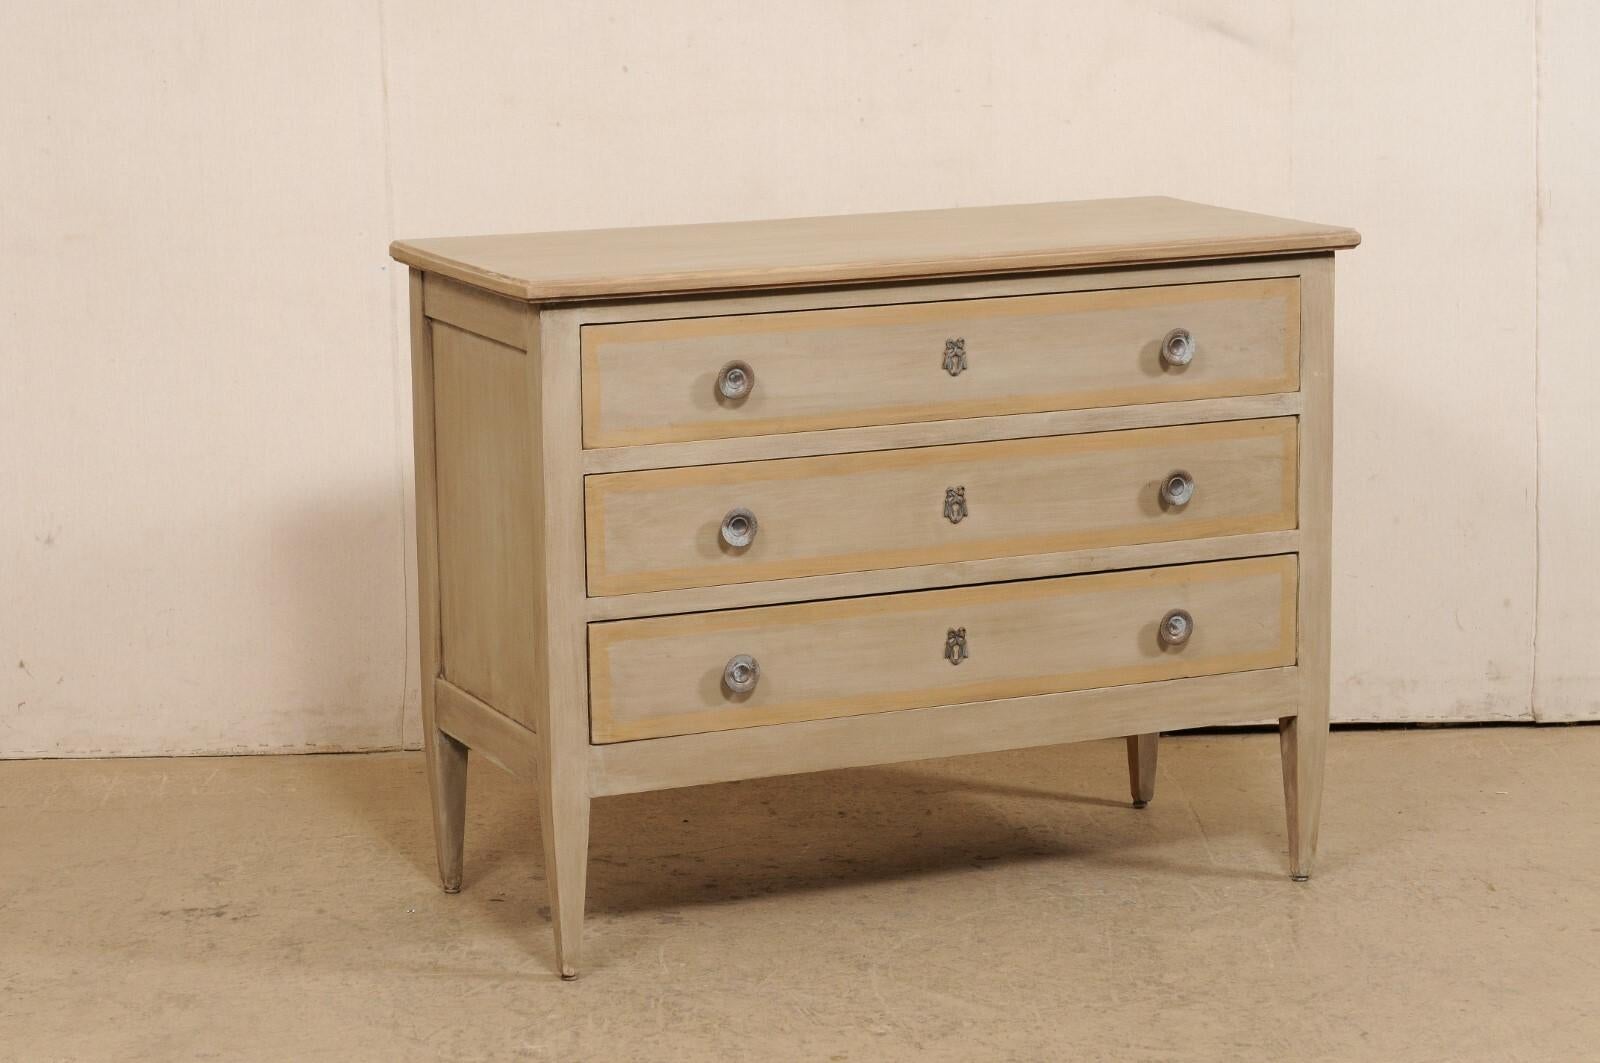 A French Neoclassical style painted wood commode from the early 20th century. This antique chest from France has been designed in clean/linear lines, with a rectangular-shaped top which slightly overhangs the case below which houses three full sized